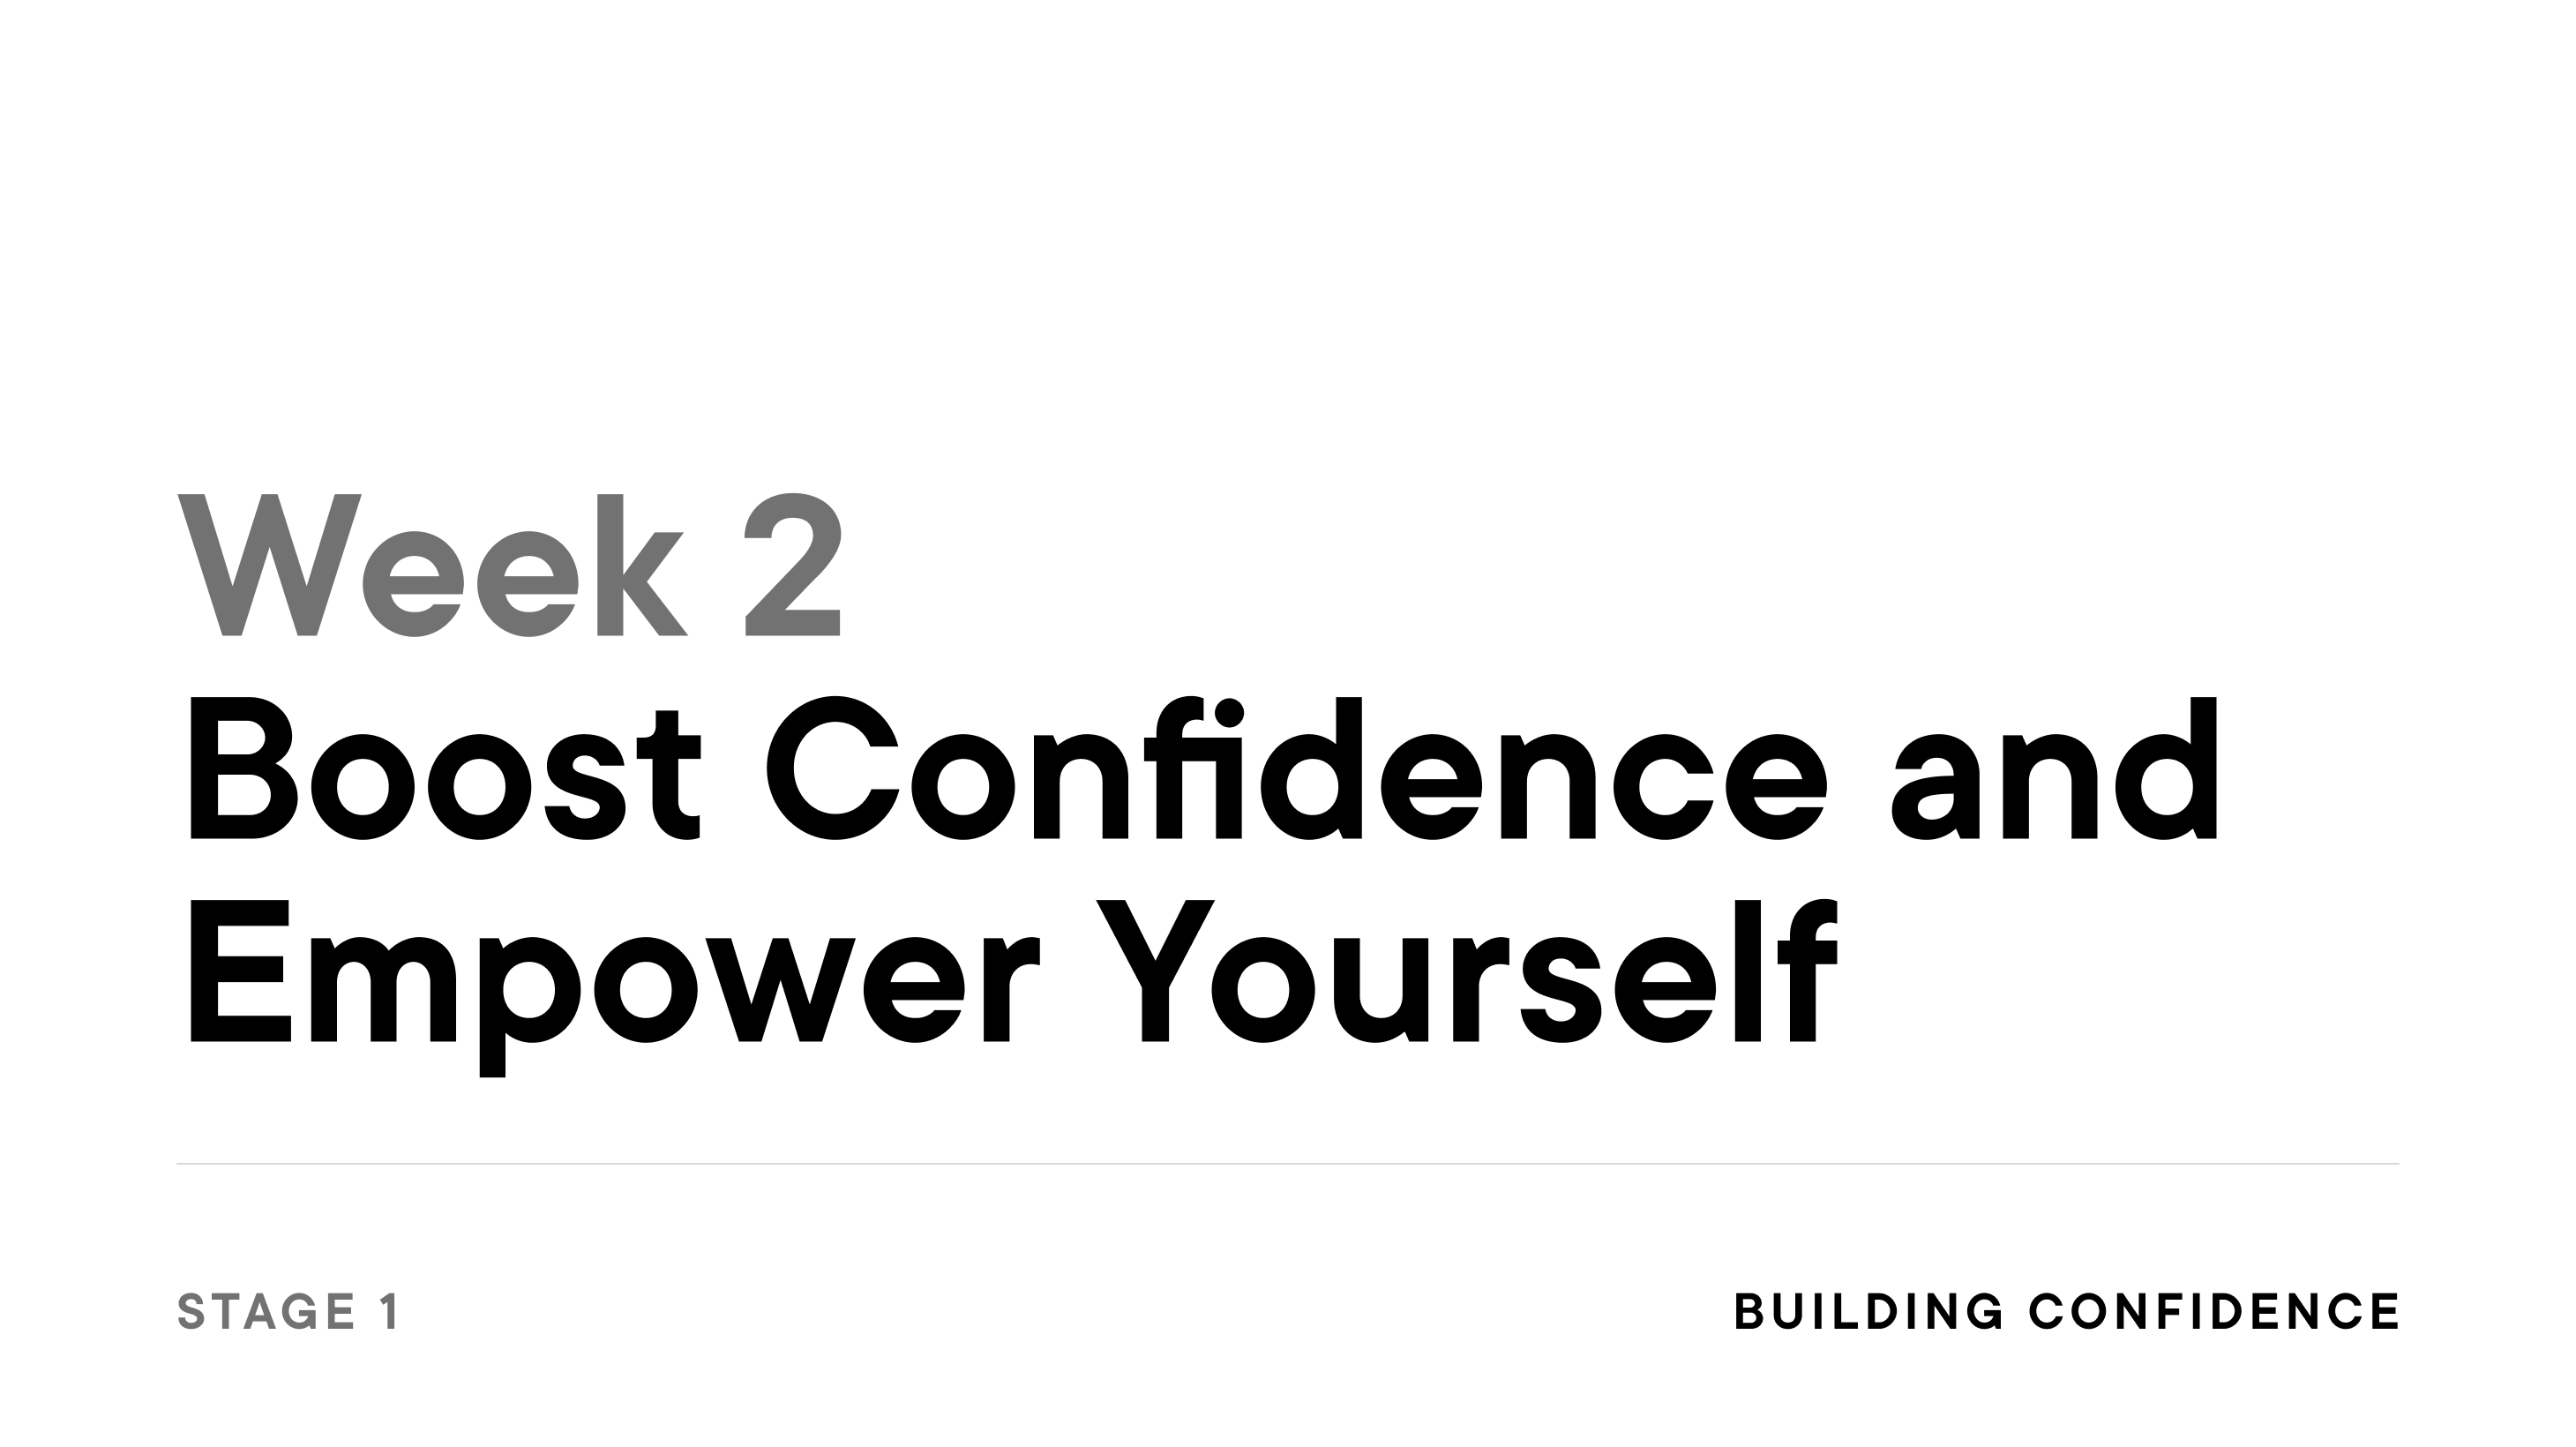 Week 2: Boost Confidence and Empower Yourself